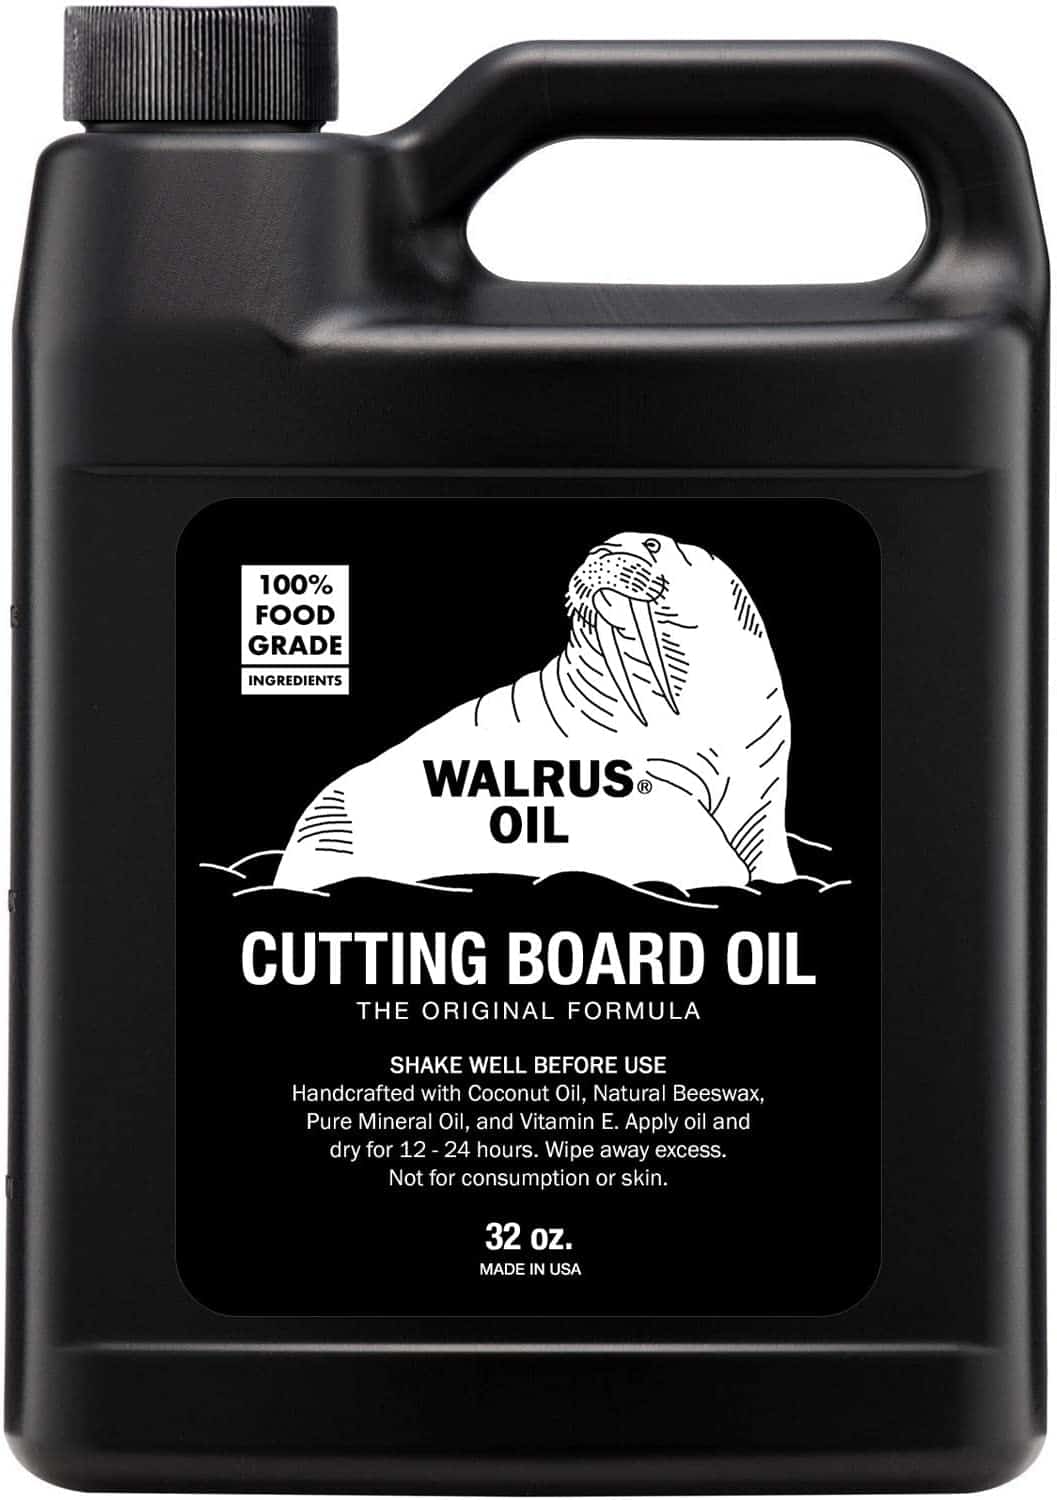 Walrus Oil for Cutting Boards